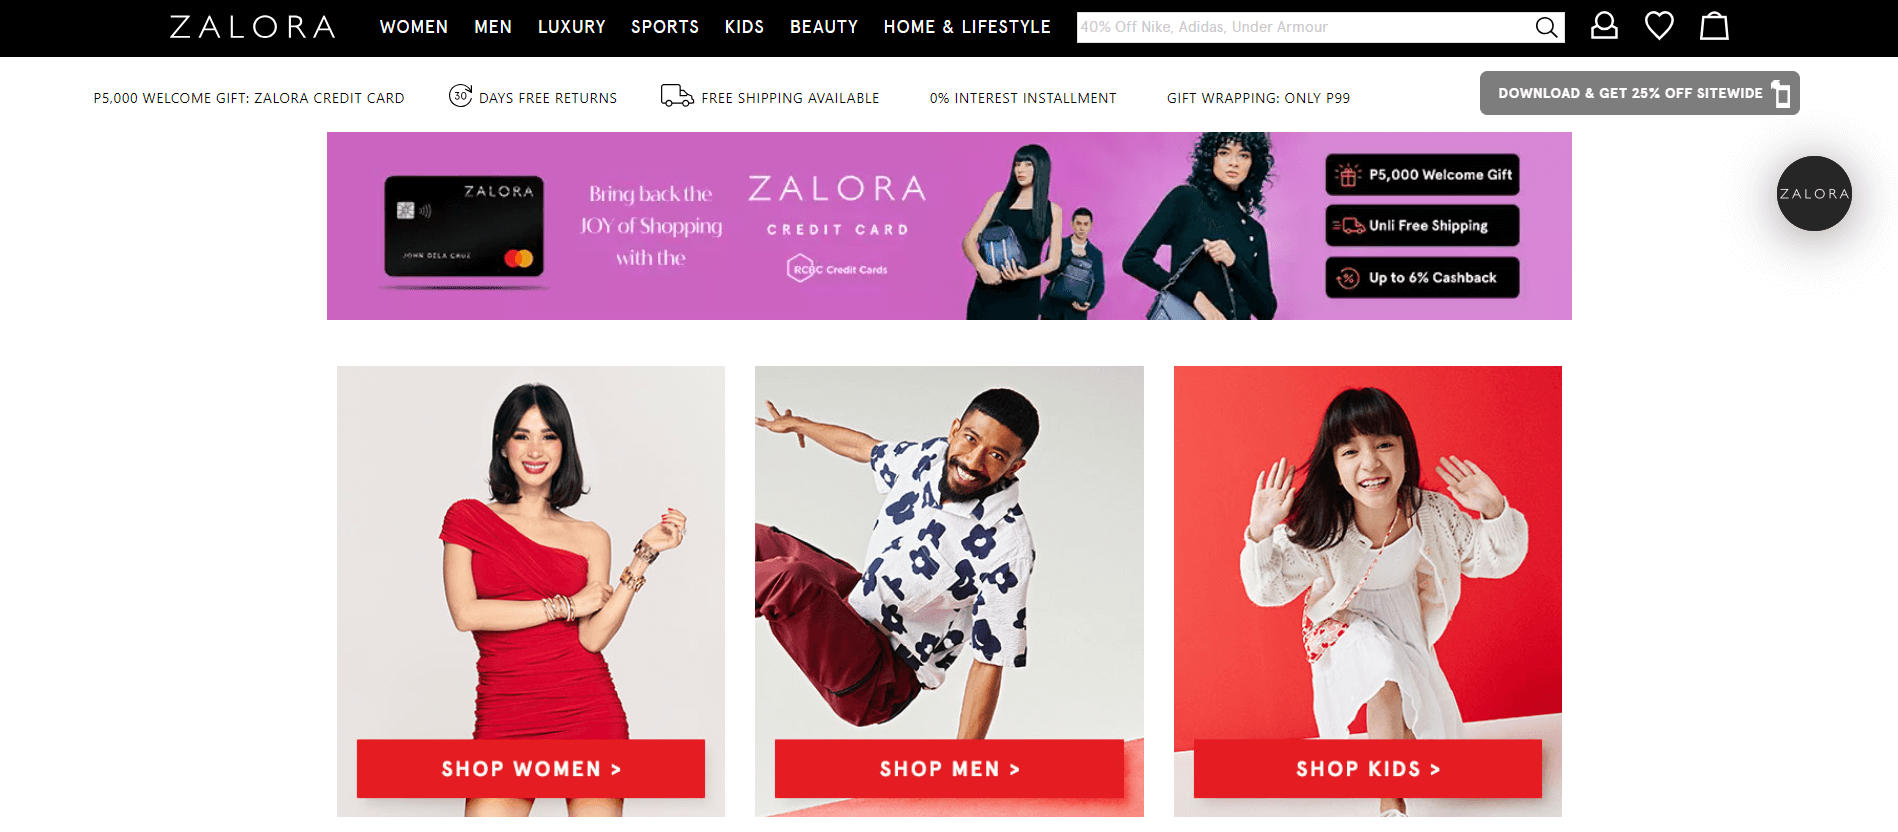 Zalora, one of Rocket Internet's most successful creations